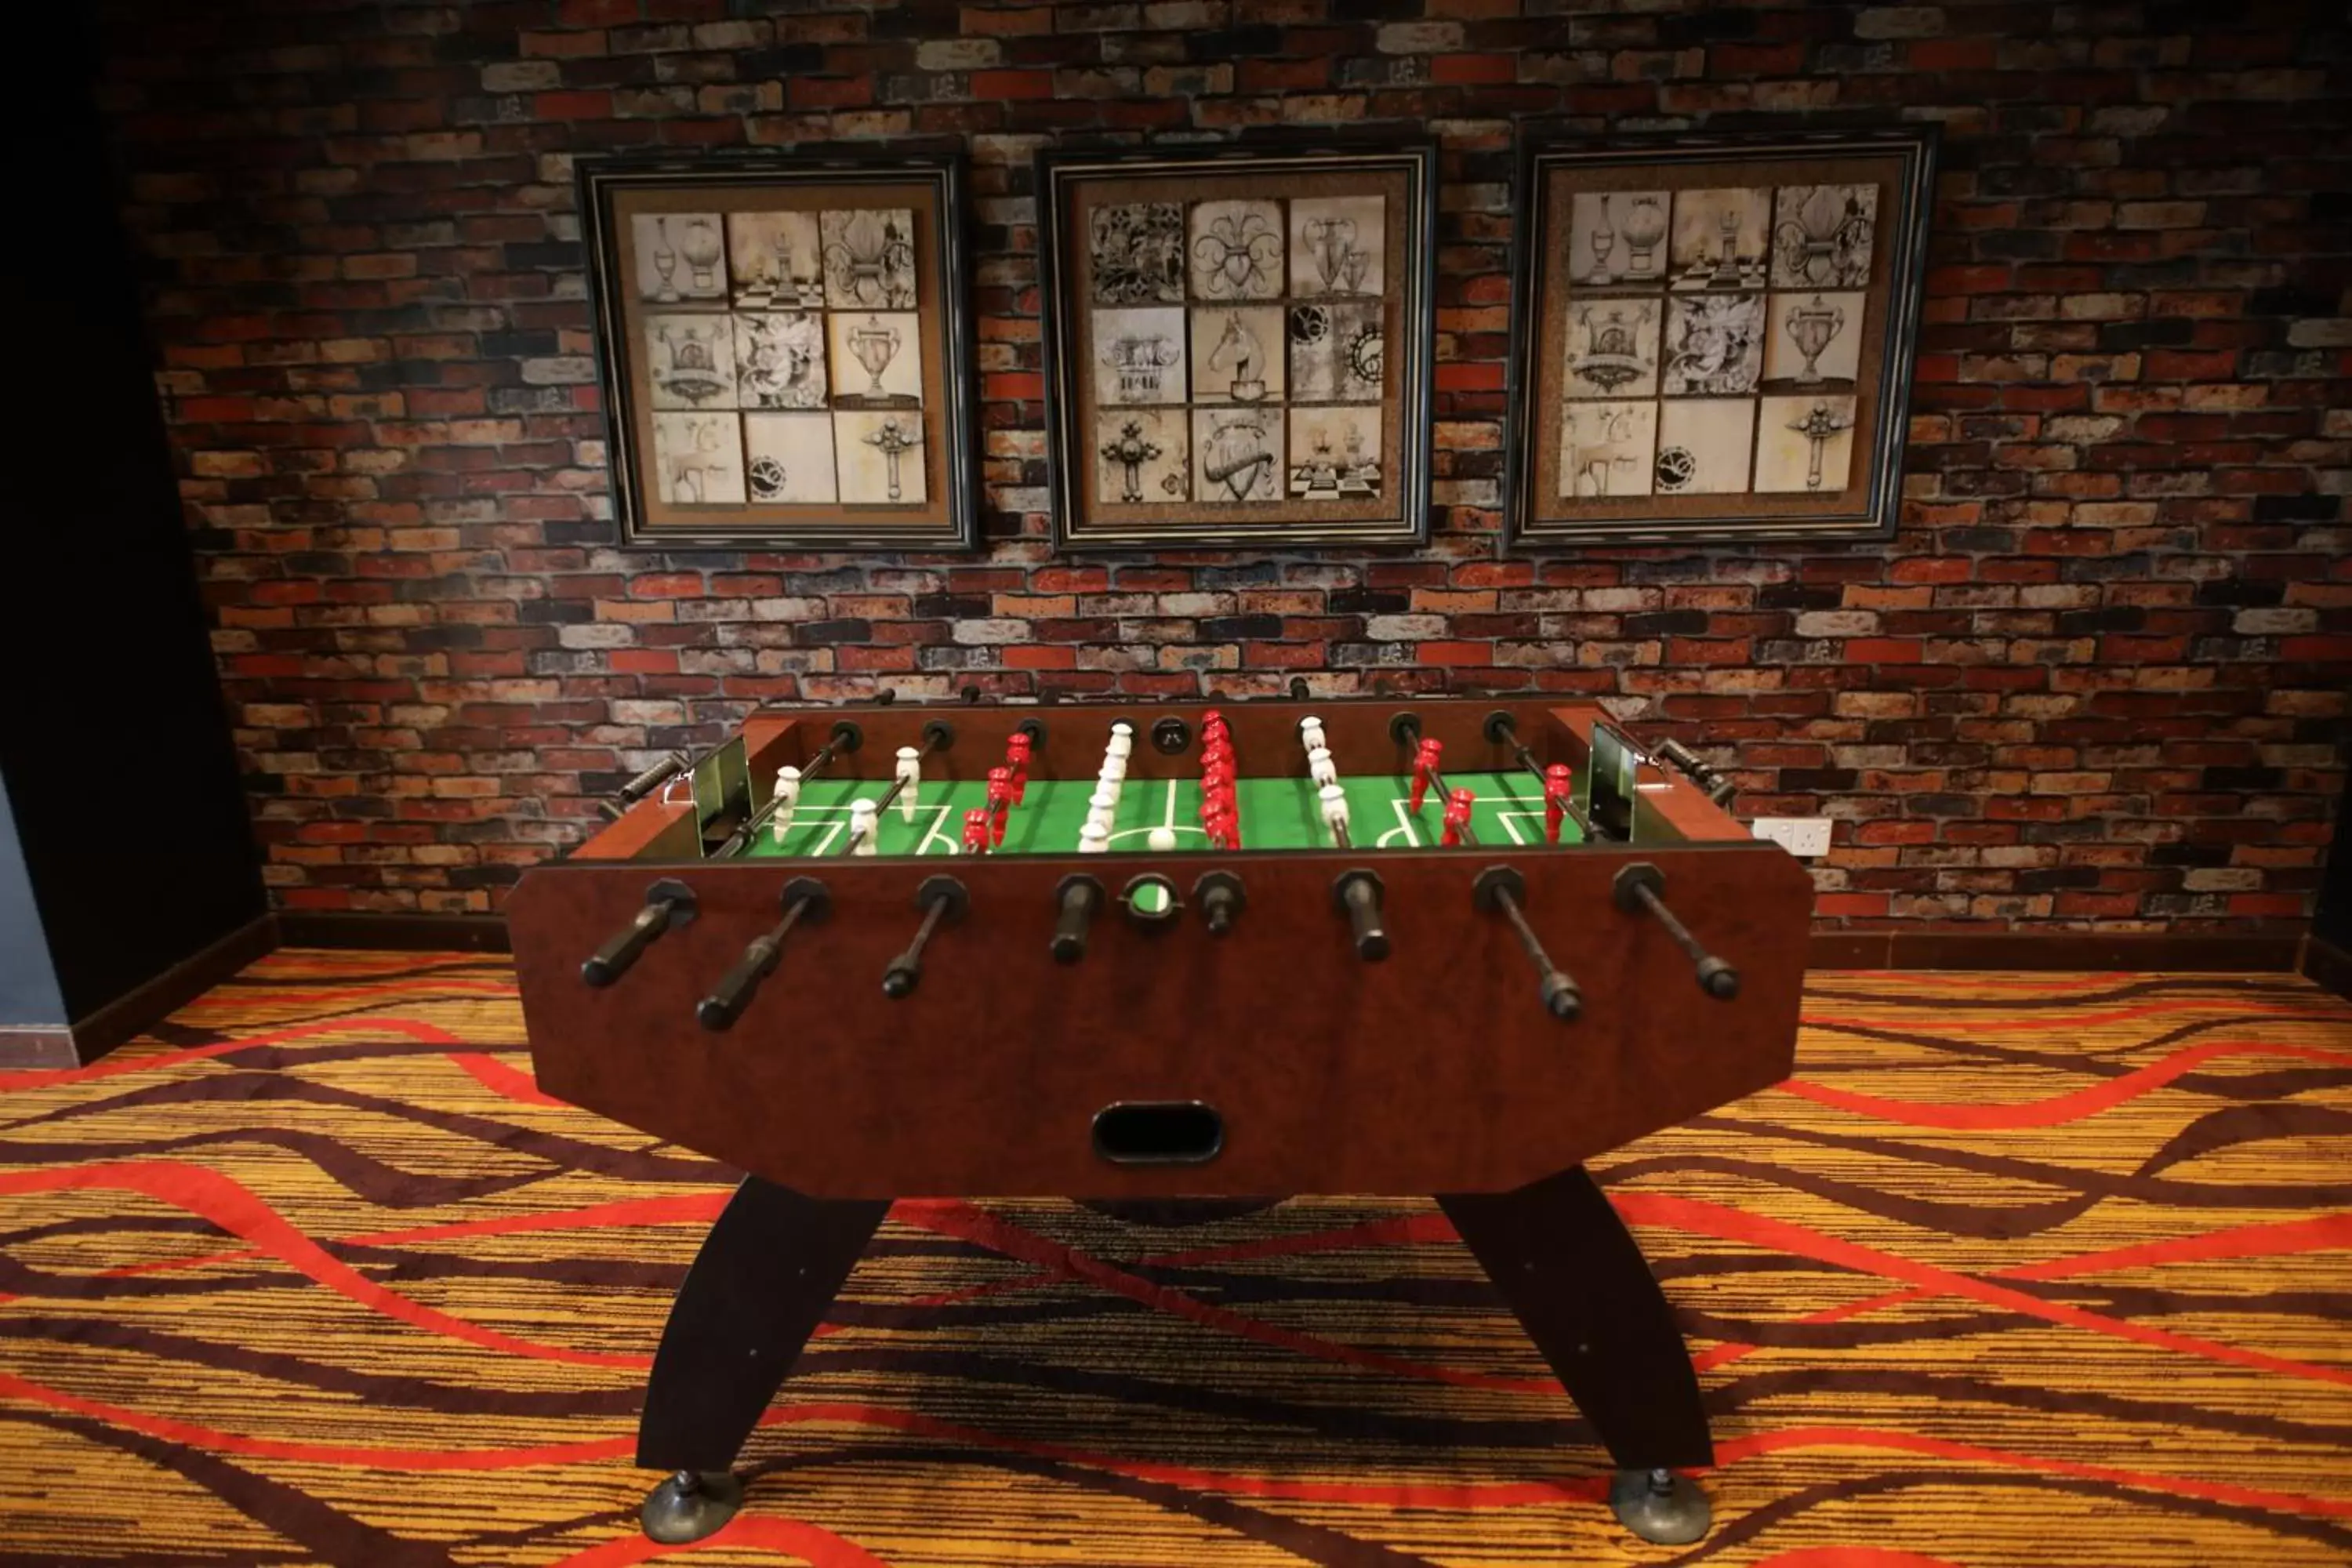 Game Room, Other Activities in The Golden Crown Hotel